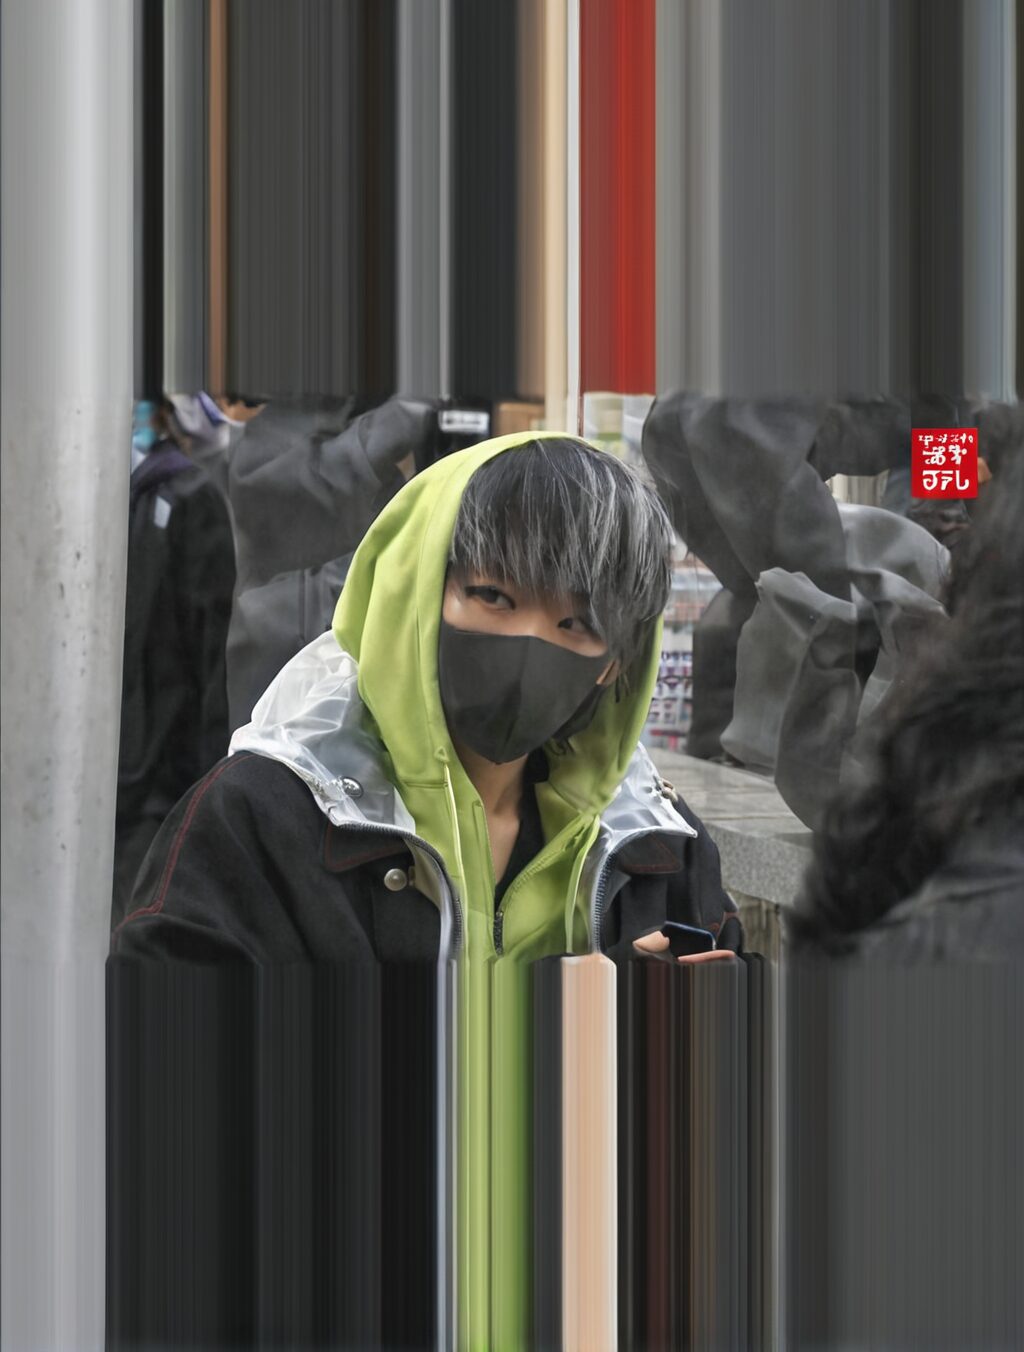 why do people wear masks in japan